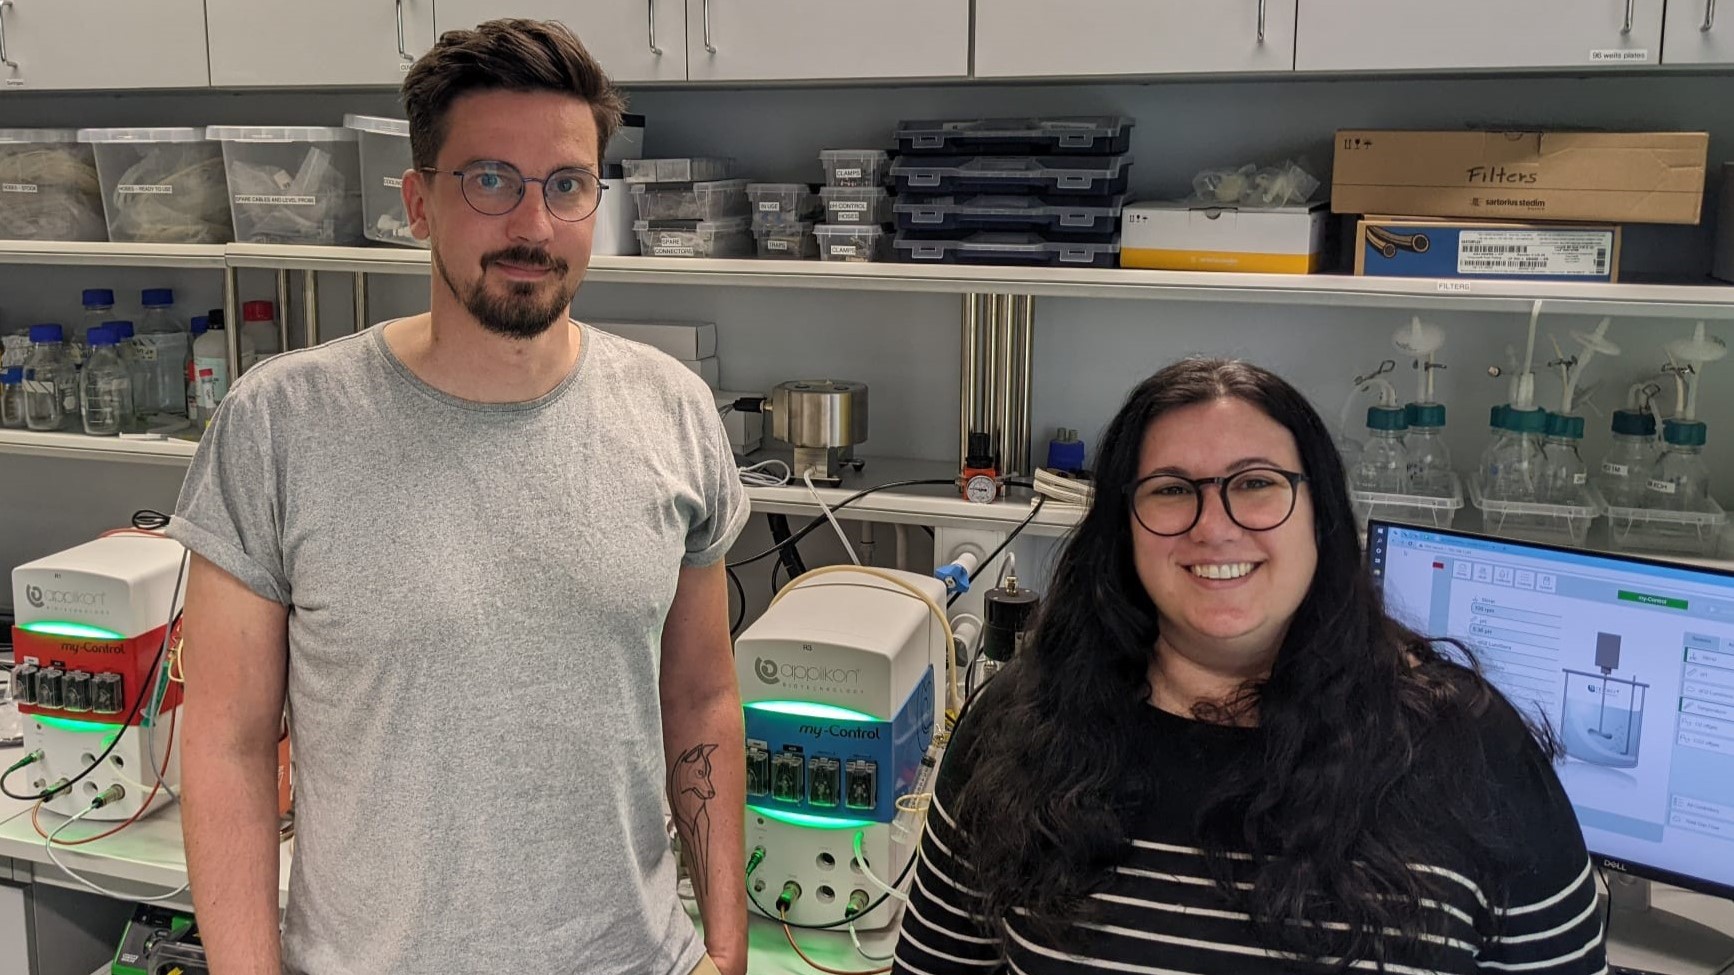 Two people standing in front of a lab with a lot of equipment.